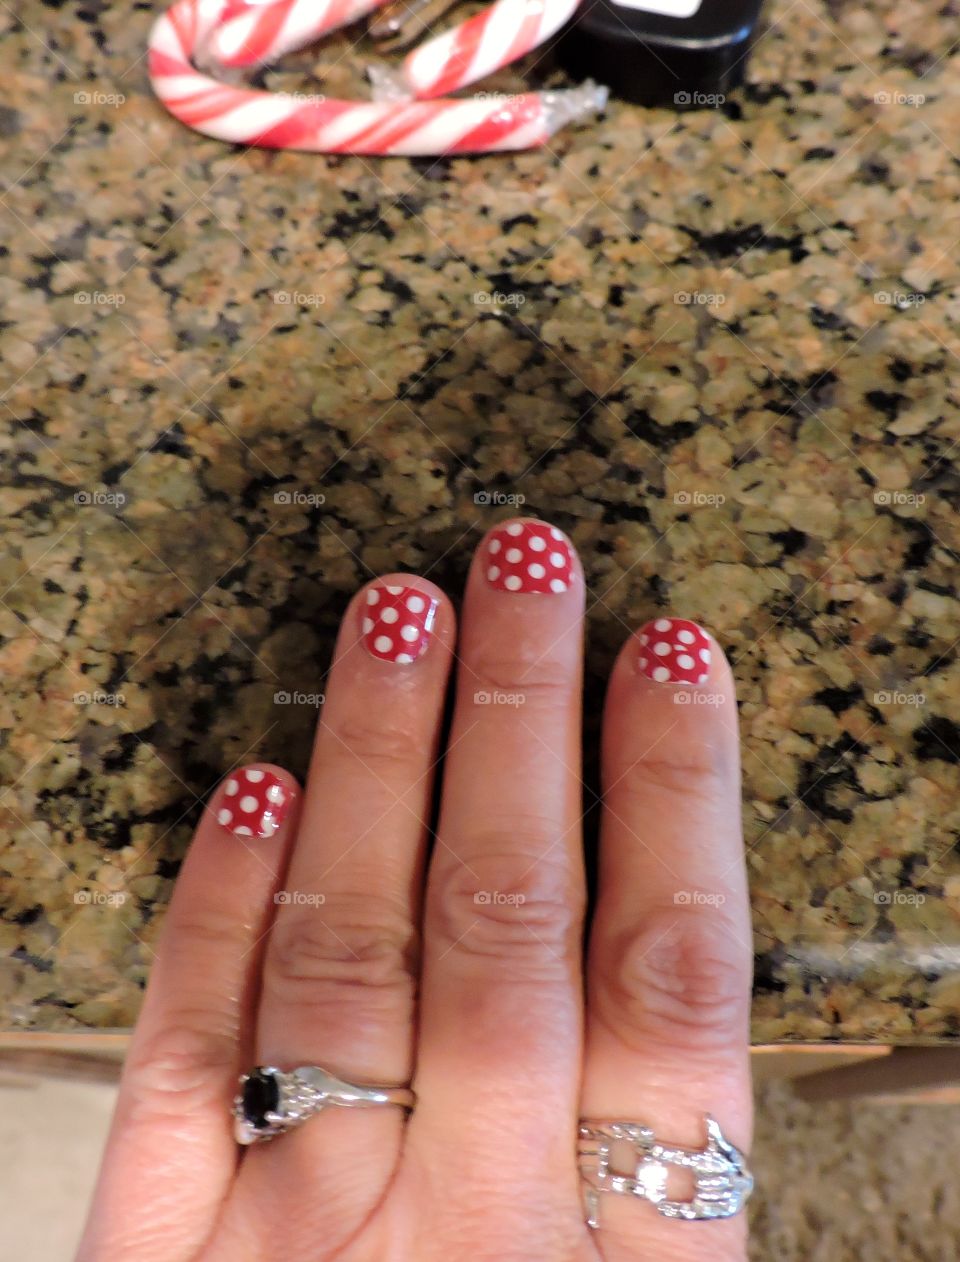 Red and white polka dots perfect fir a peppermint party! 